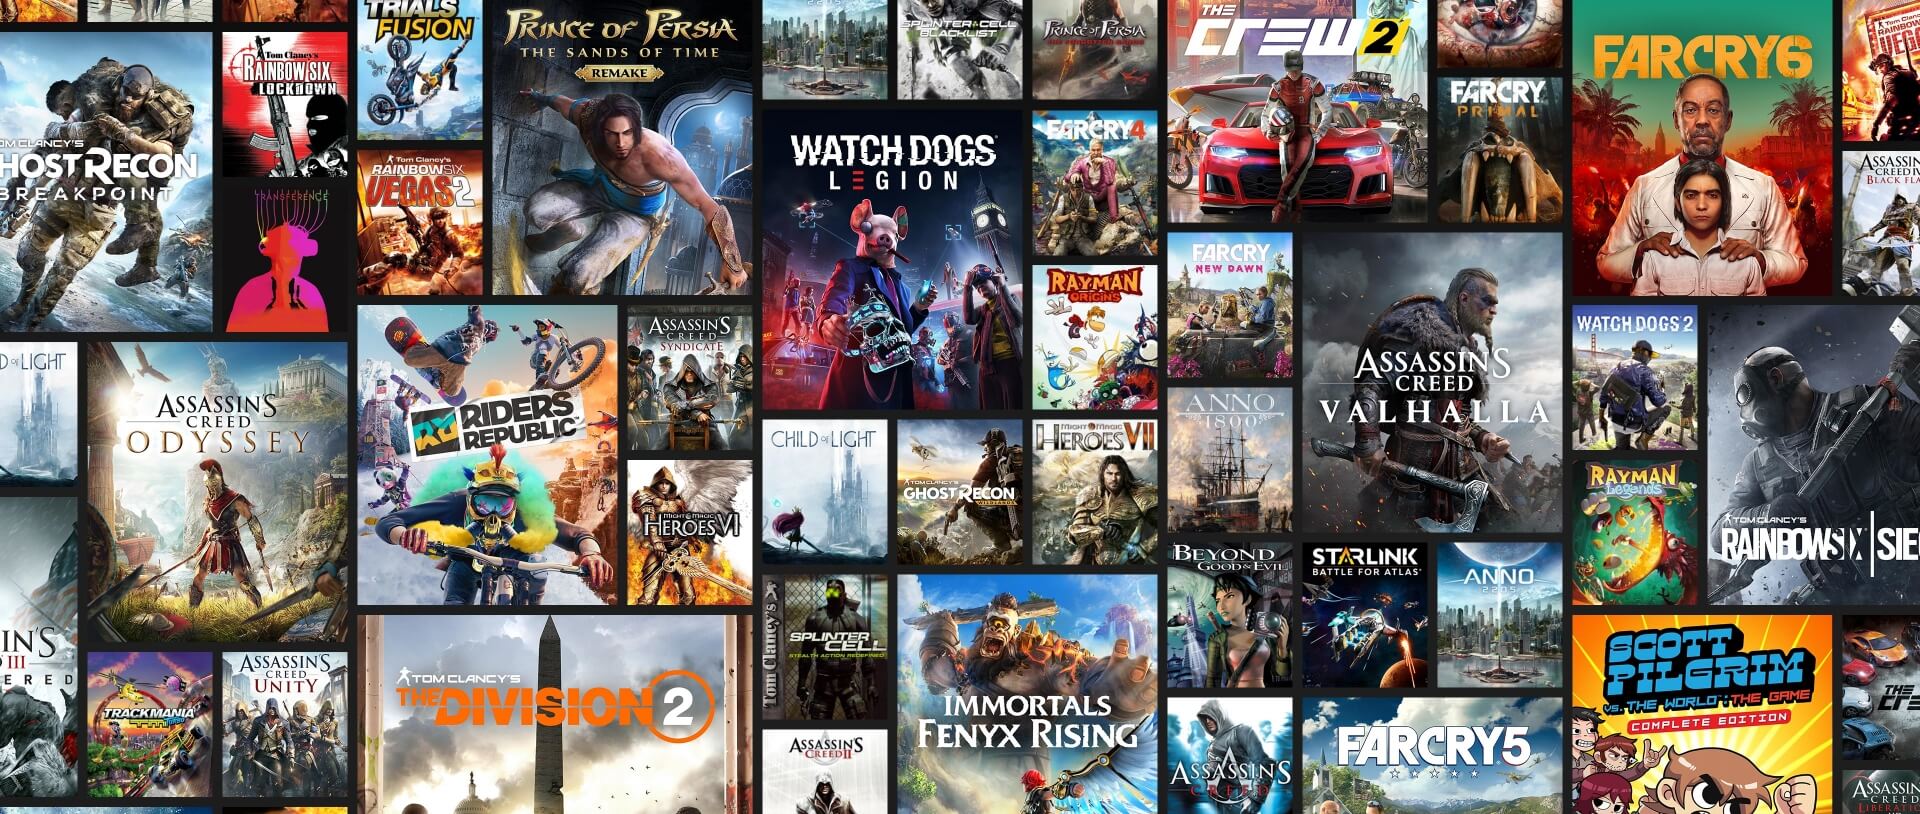 Did the price for game pass PC increase as well? : r/XboxGamePass